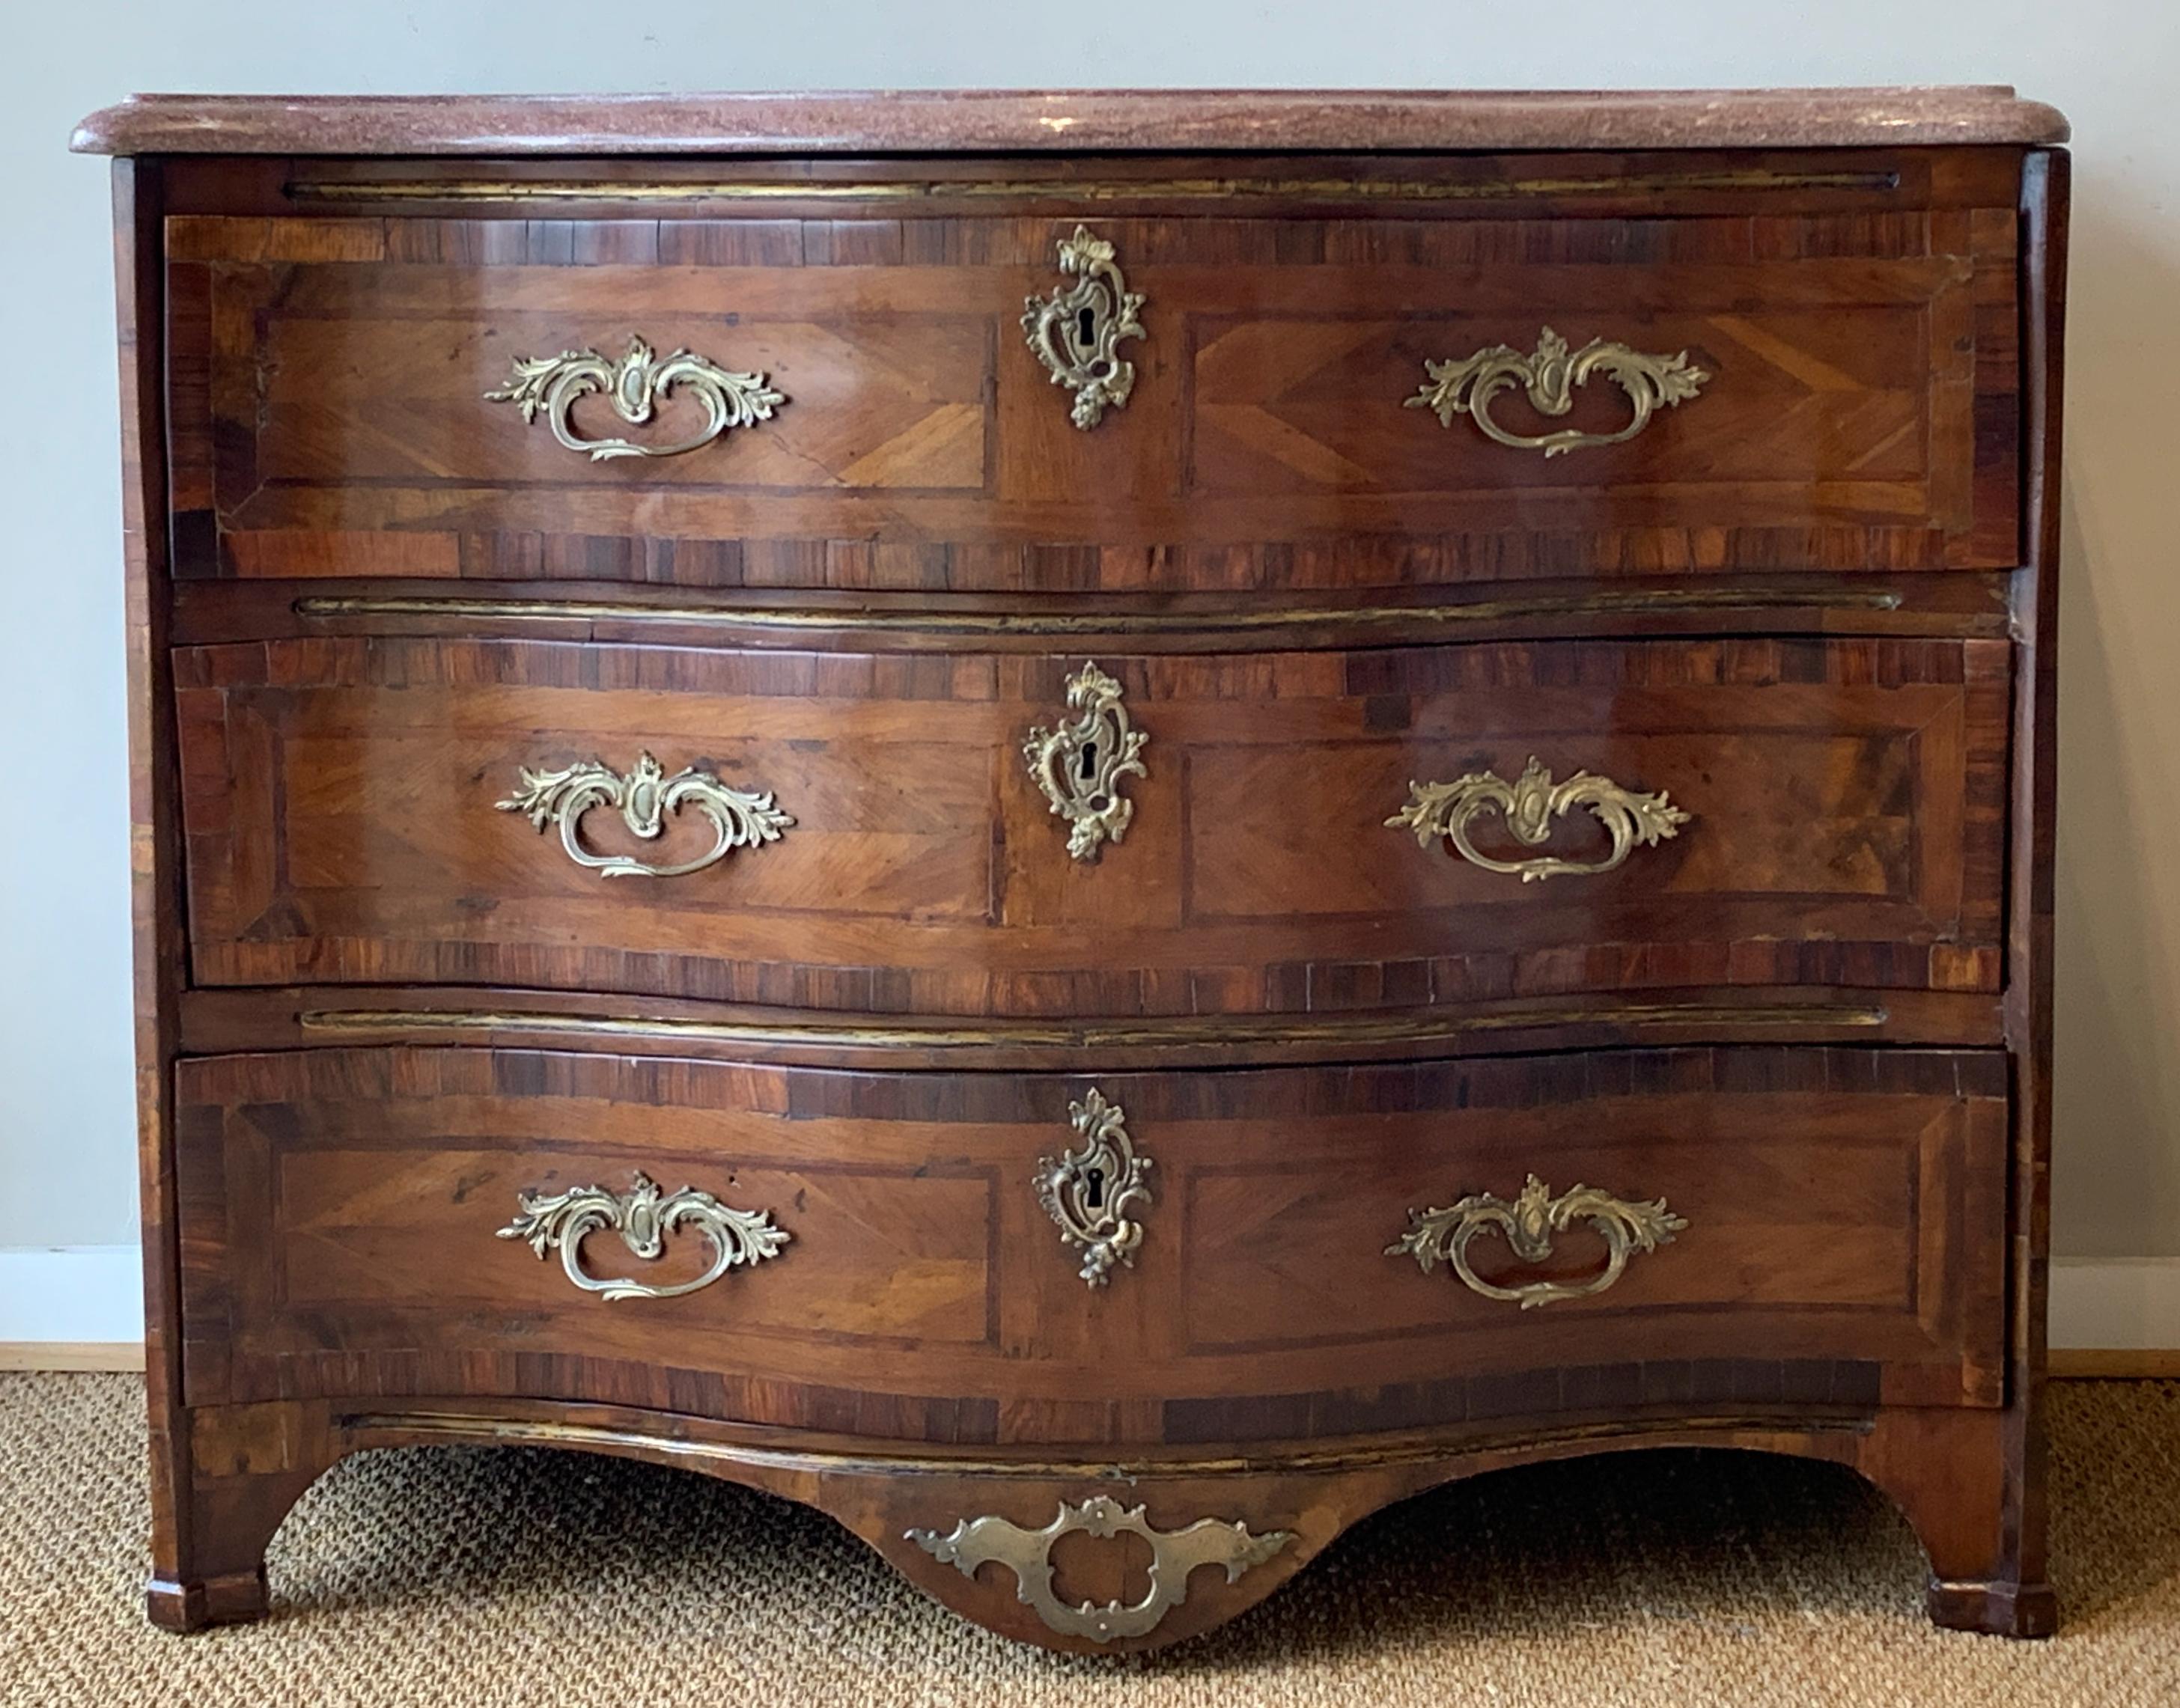 An elegant mid-18th century Louis XV serpentine front three drawer commode with later rose colored granite top. The elaborately inlaid exotic wood is accented with brass inlay between the drawers and appears to have the original cast brass pulls.